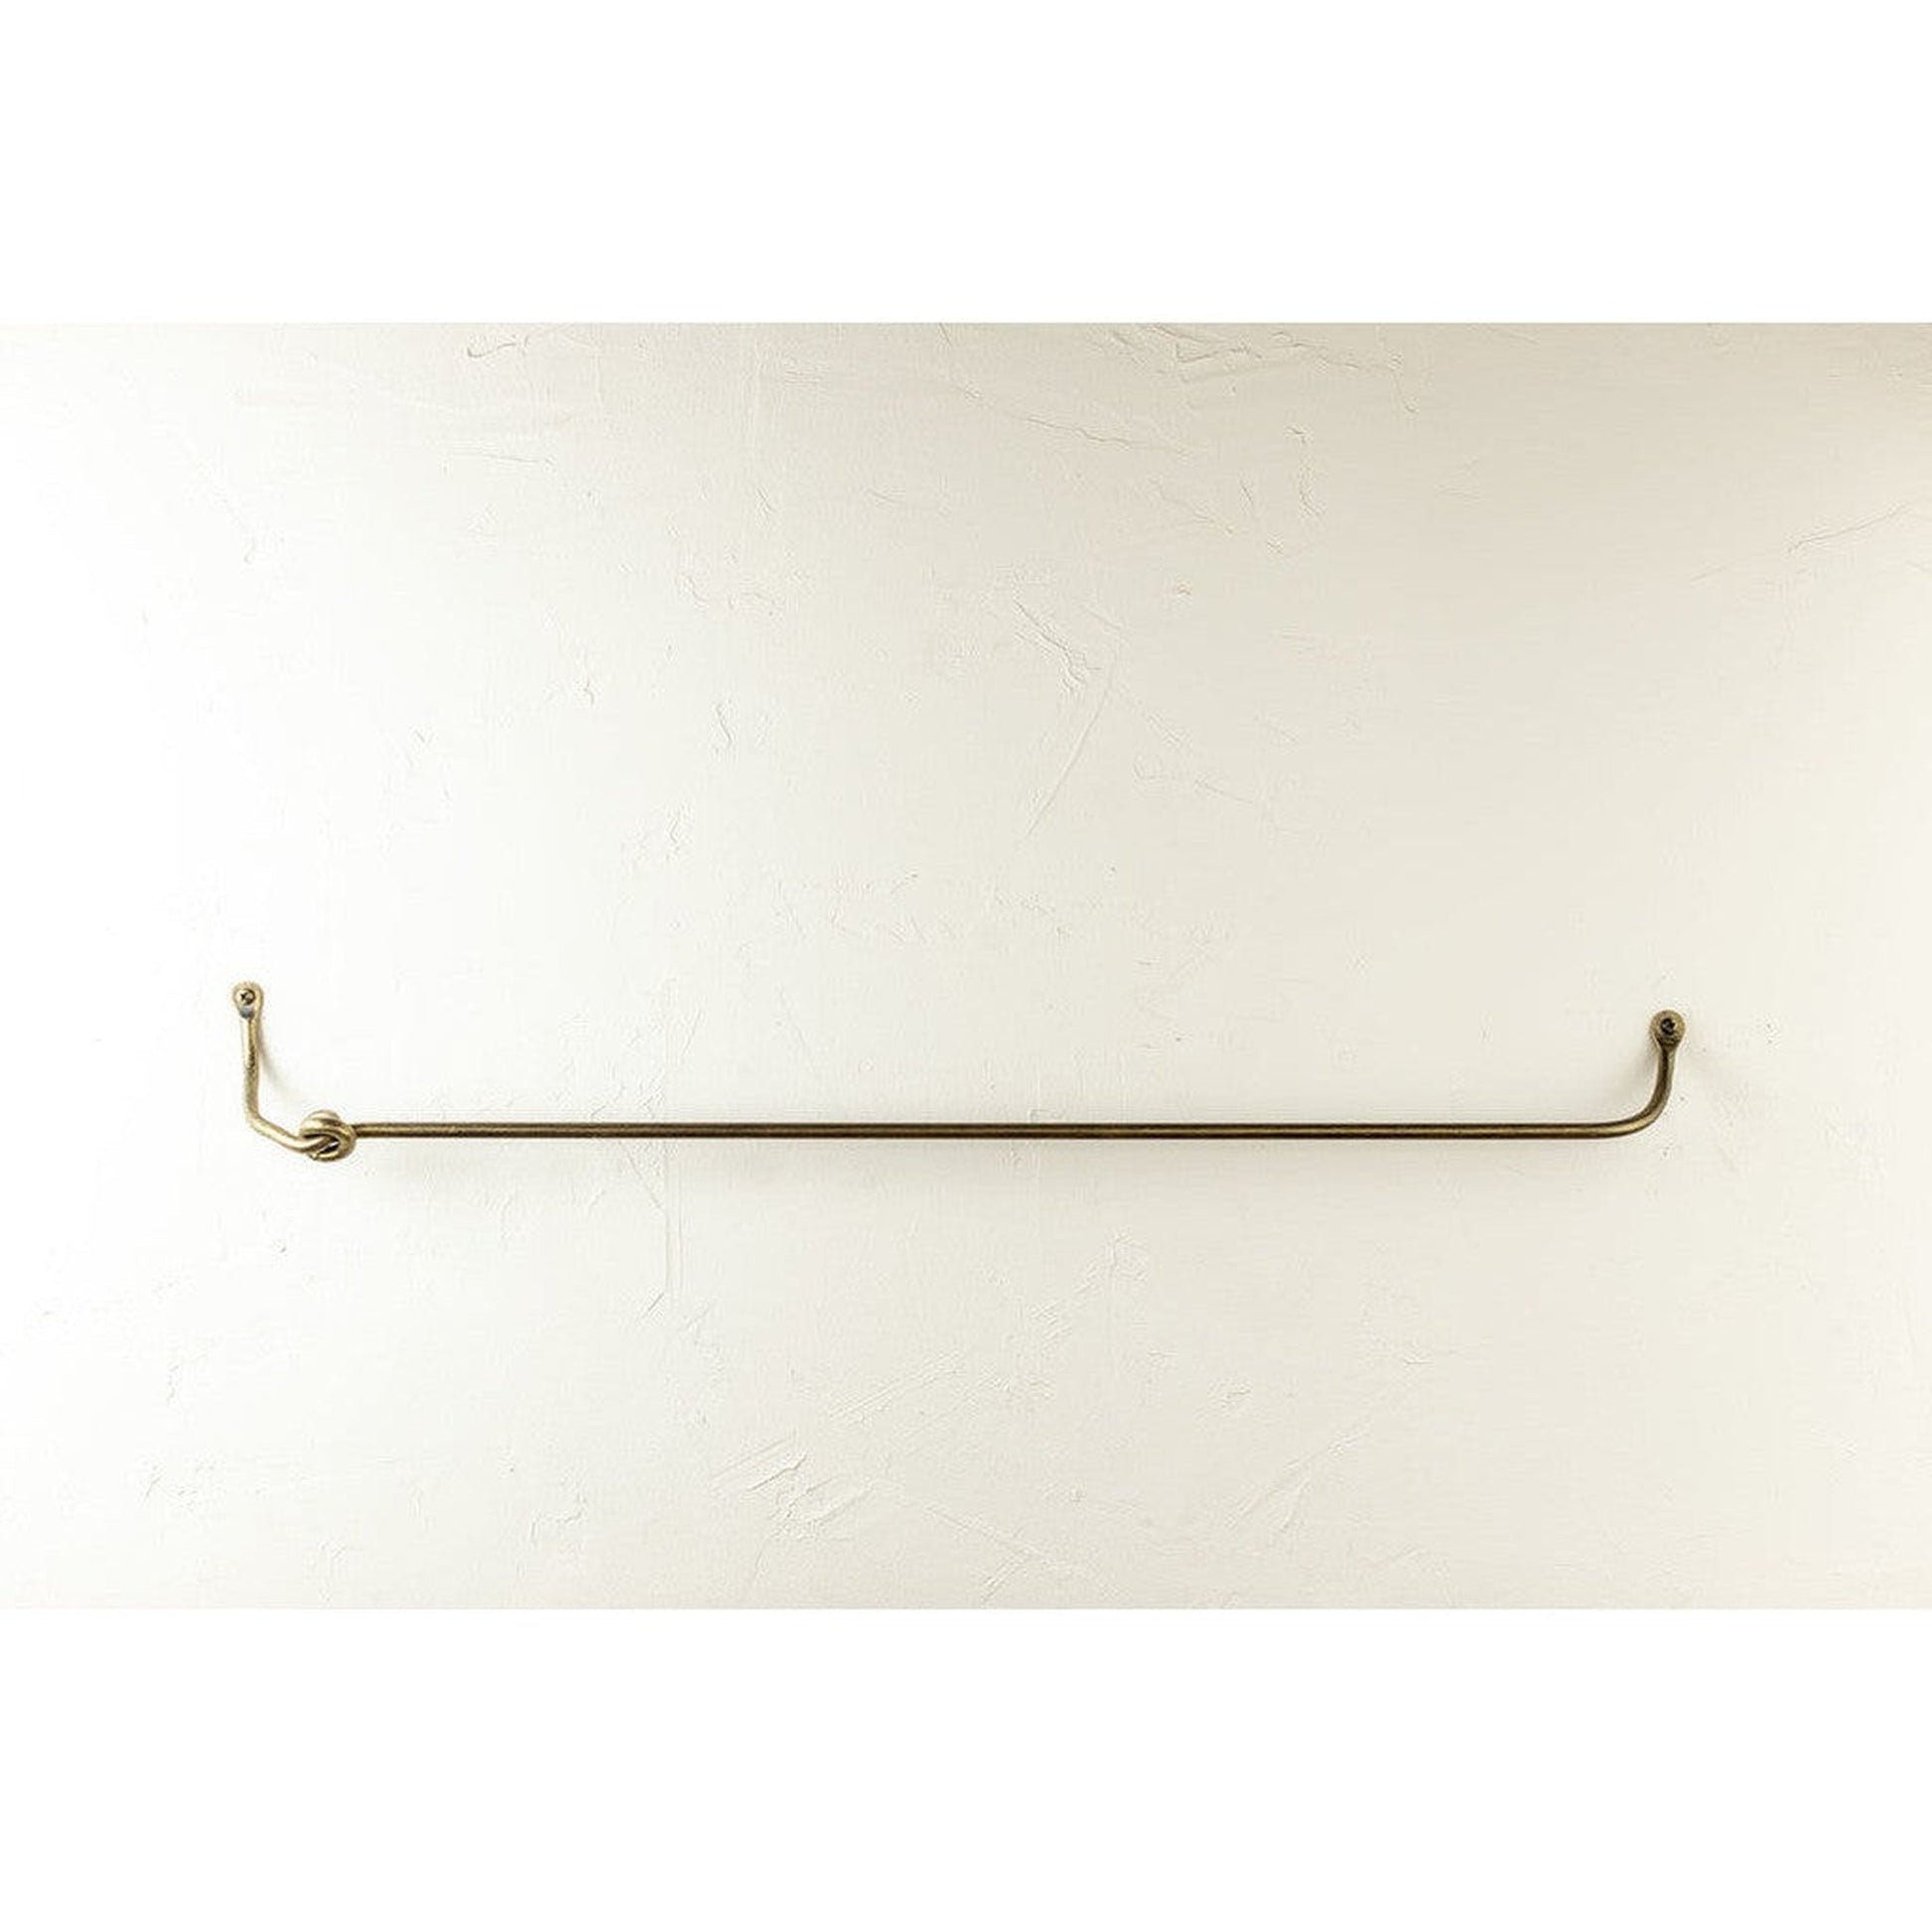 Stone County Ironworks Knot 24" Woodland Brown Iron Towel Bar With Copper Iron Accent